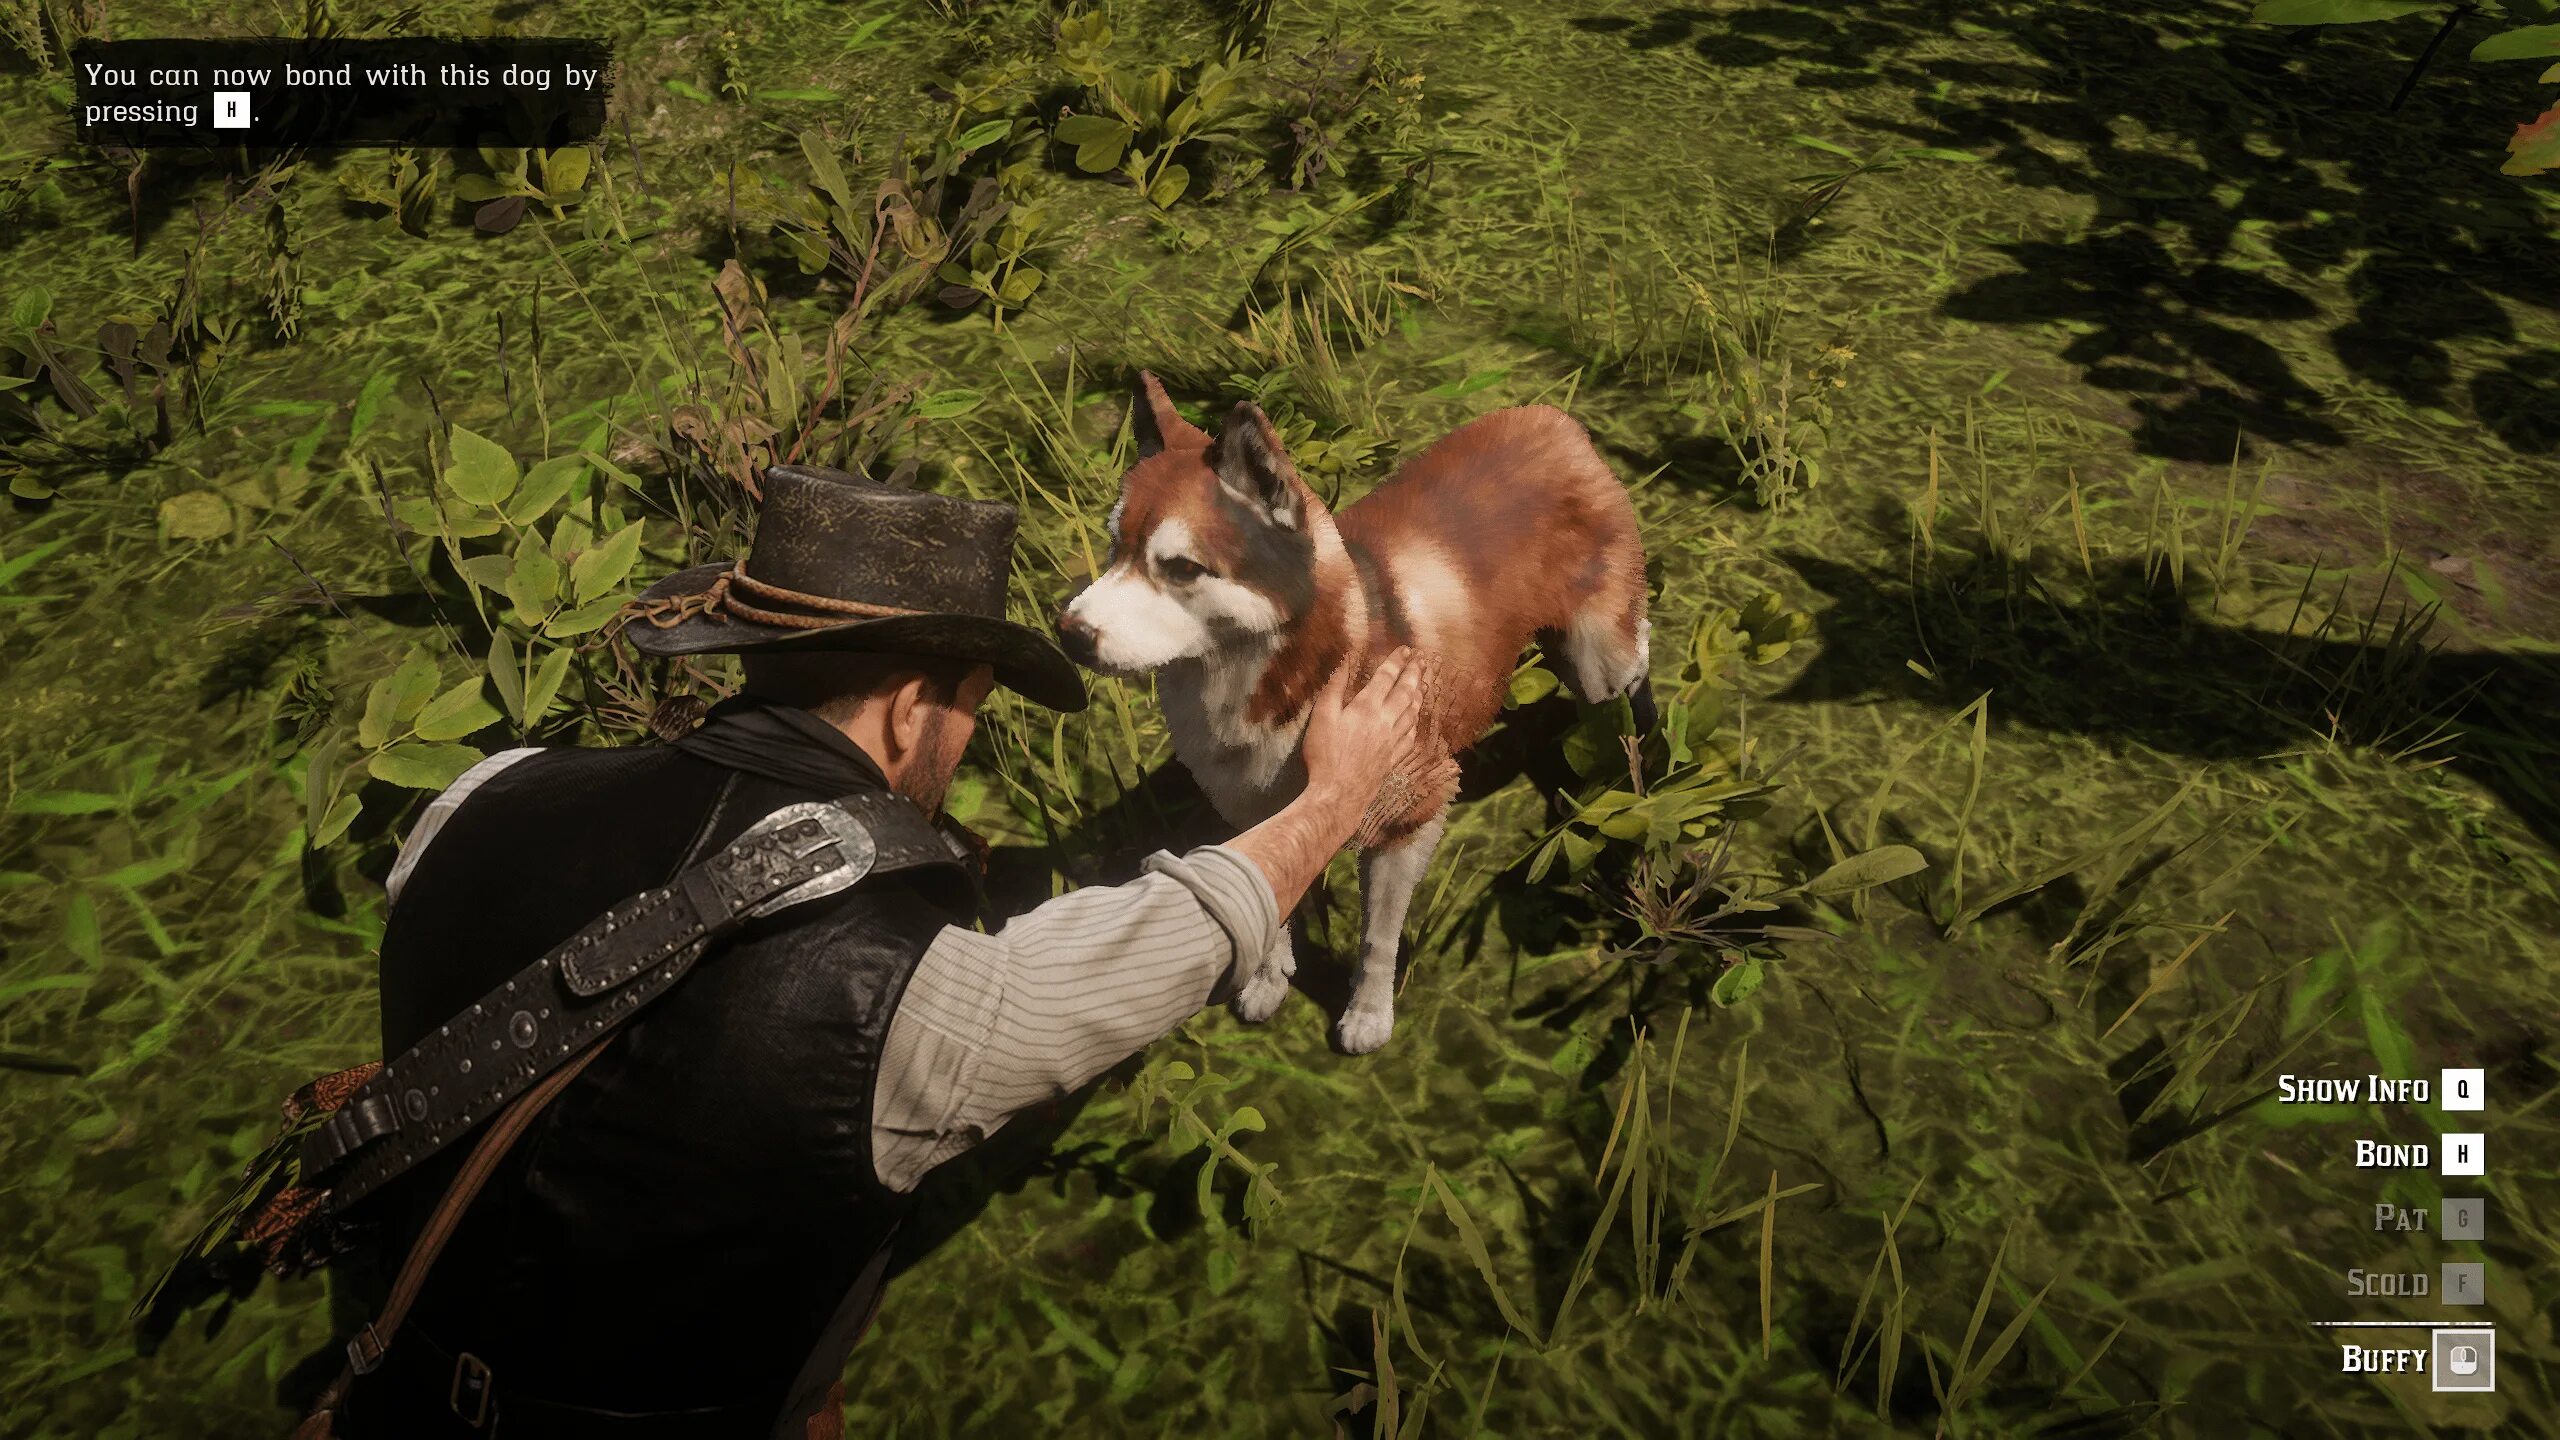 Red Dead Redemption 2 Dog. Red Dead Redemption 2 собаки. Red Dead Redemption 2 Companion. РДР мод на собаку.